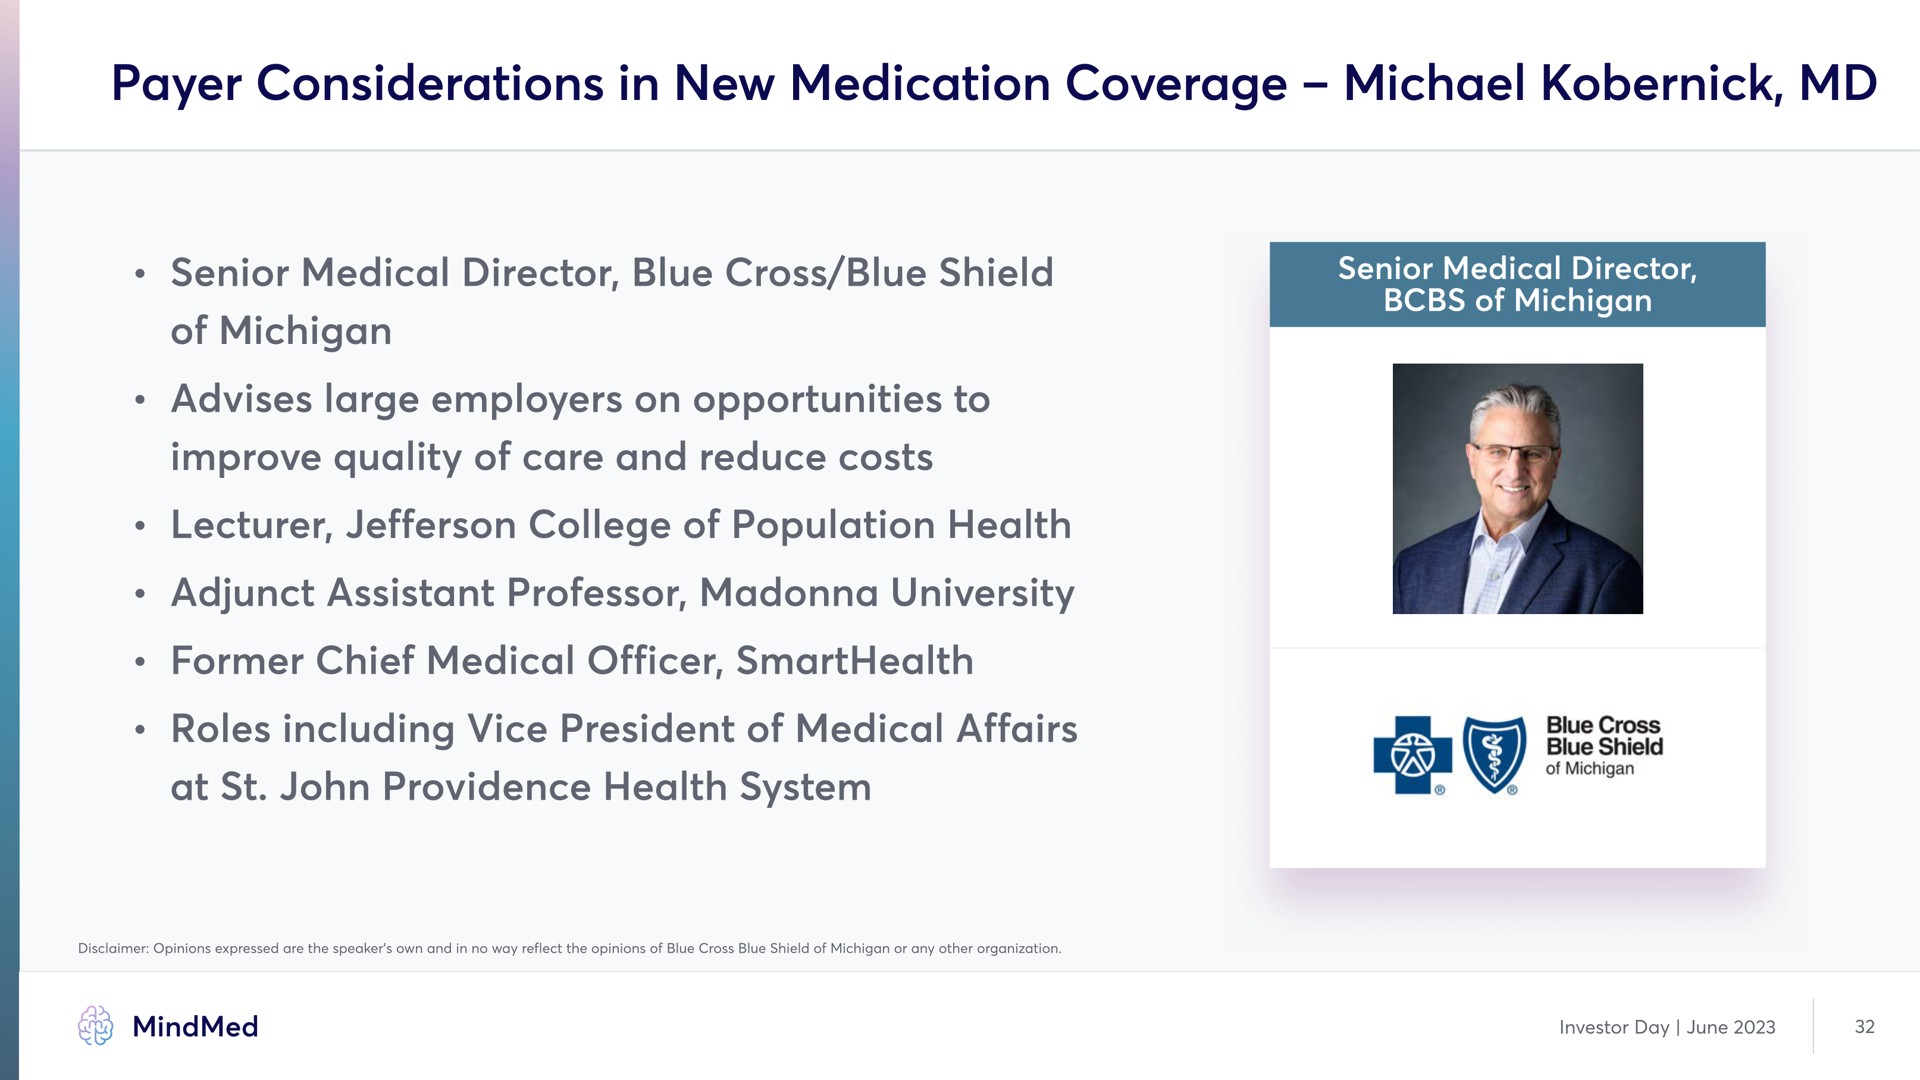 payer considerations in new medication coverage | MindMed